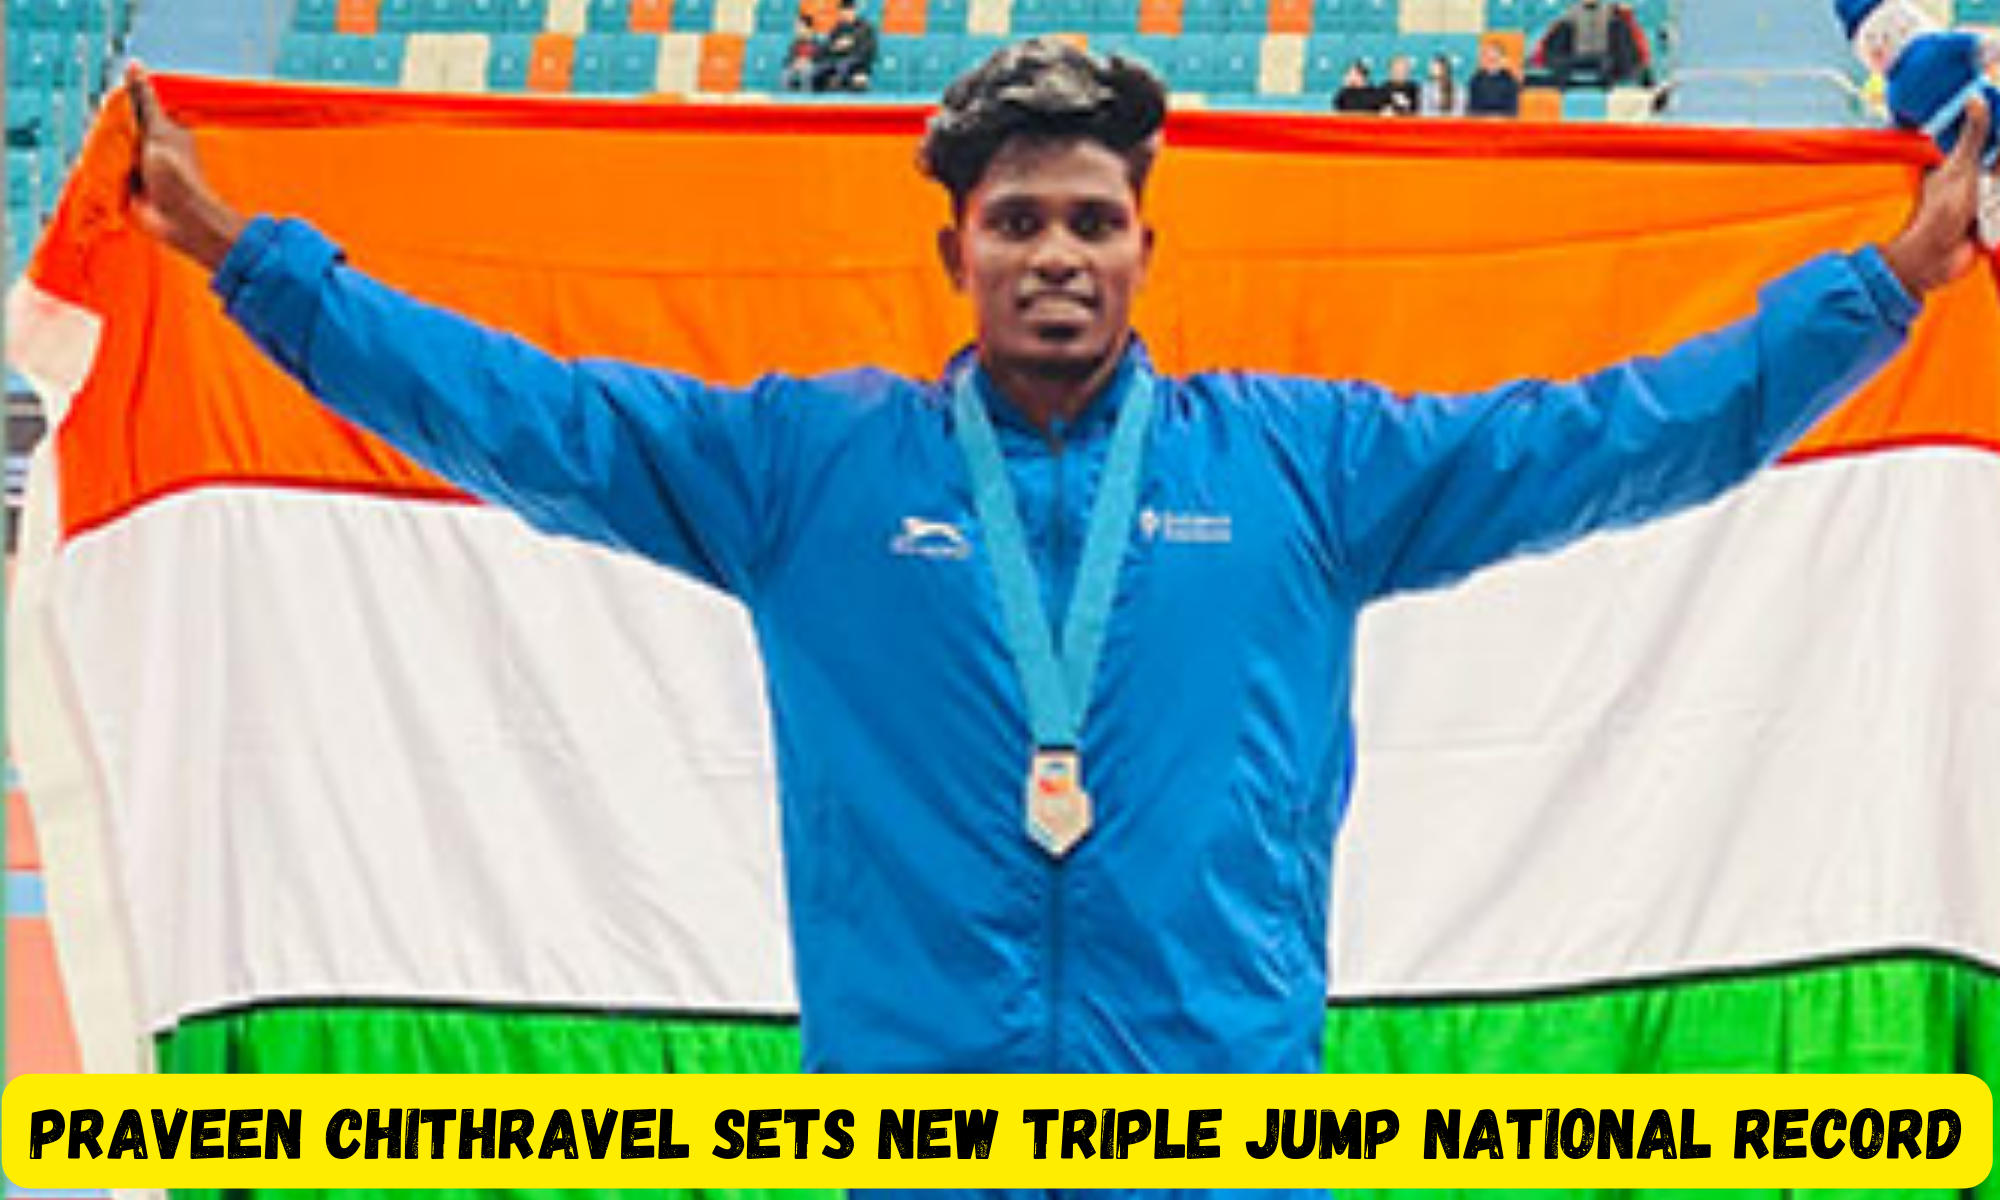 Praveen Chithravel sets new triple jump national record